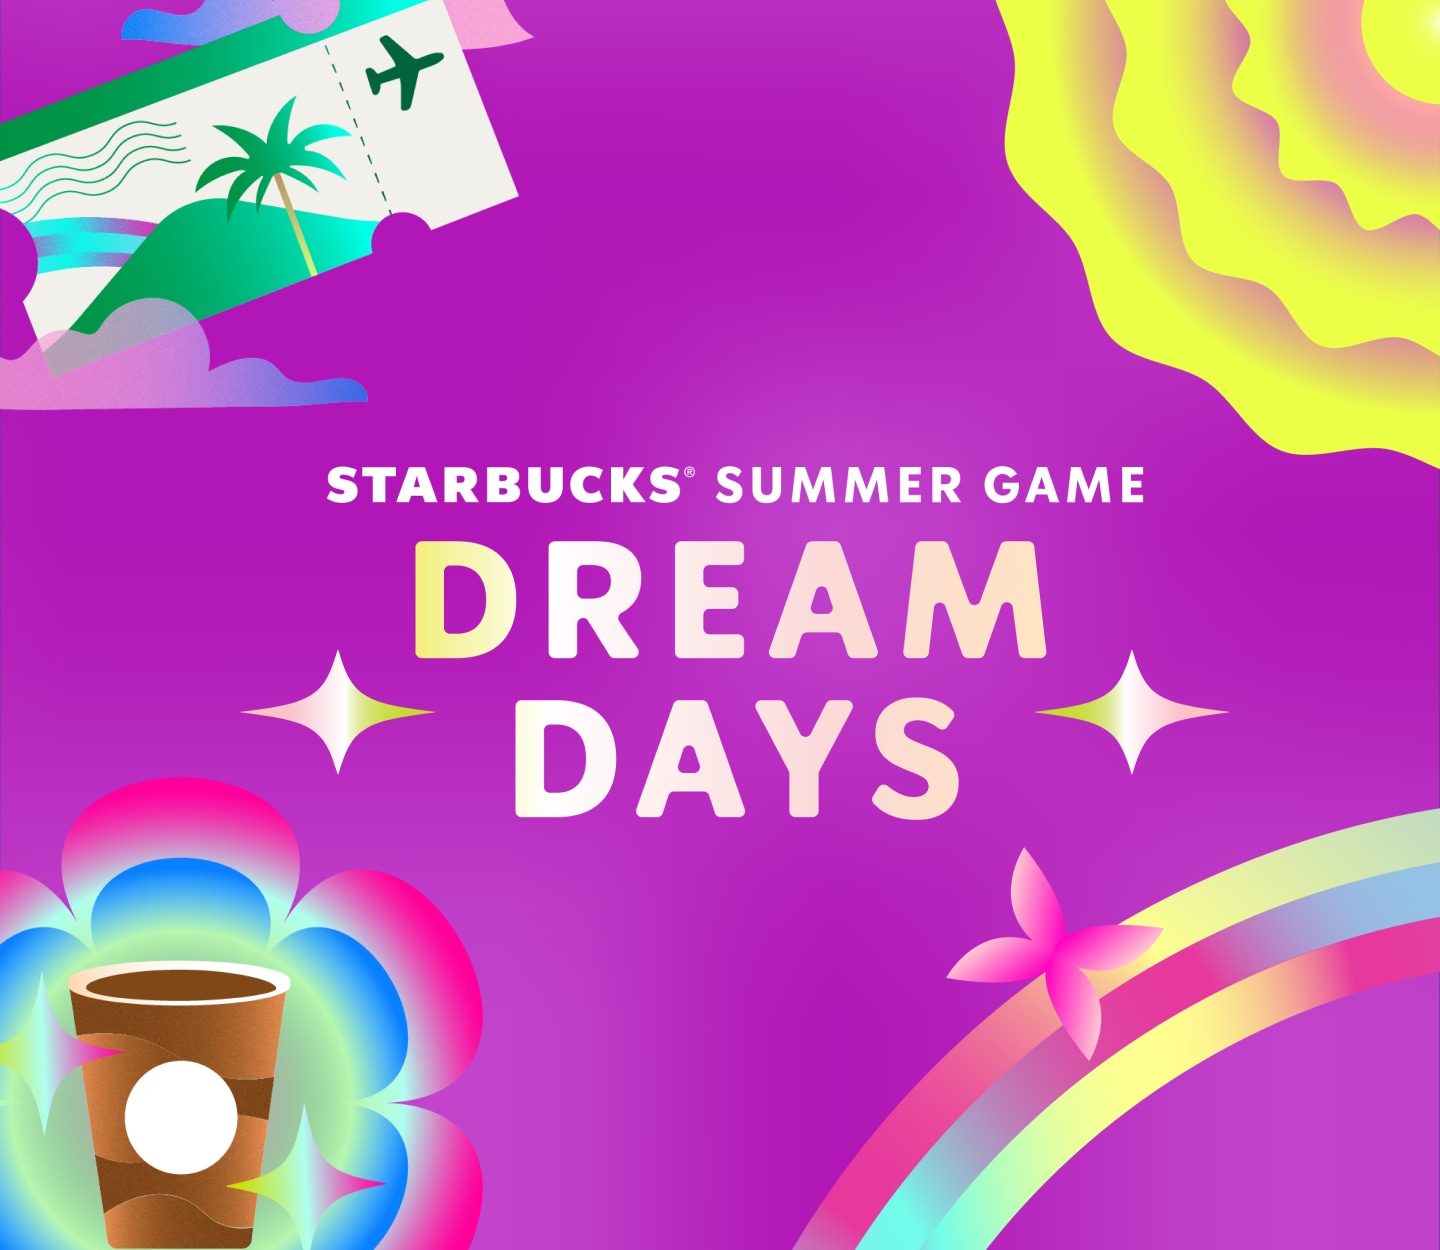 The text “Starbucks® Summer Game: Dream Days” on a magenta background surrounded by prize icons.